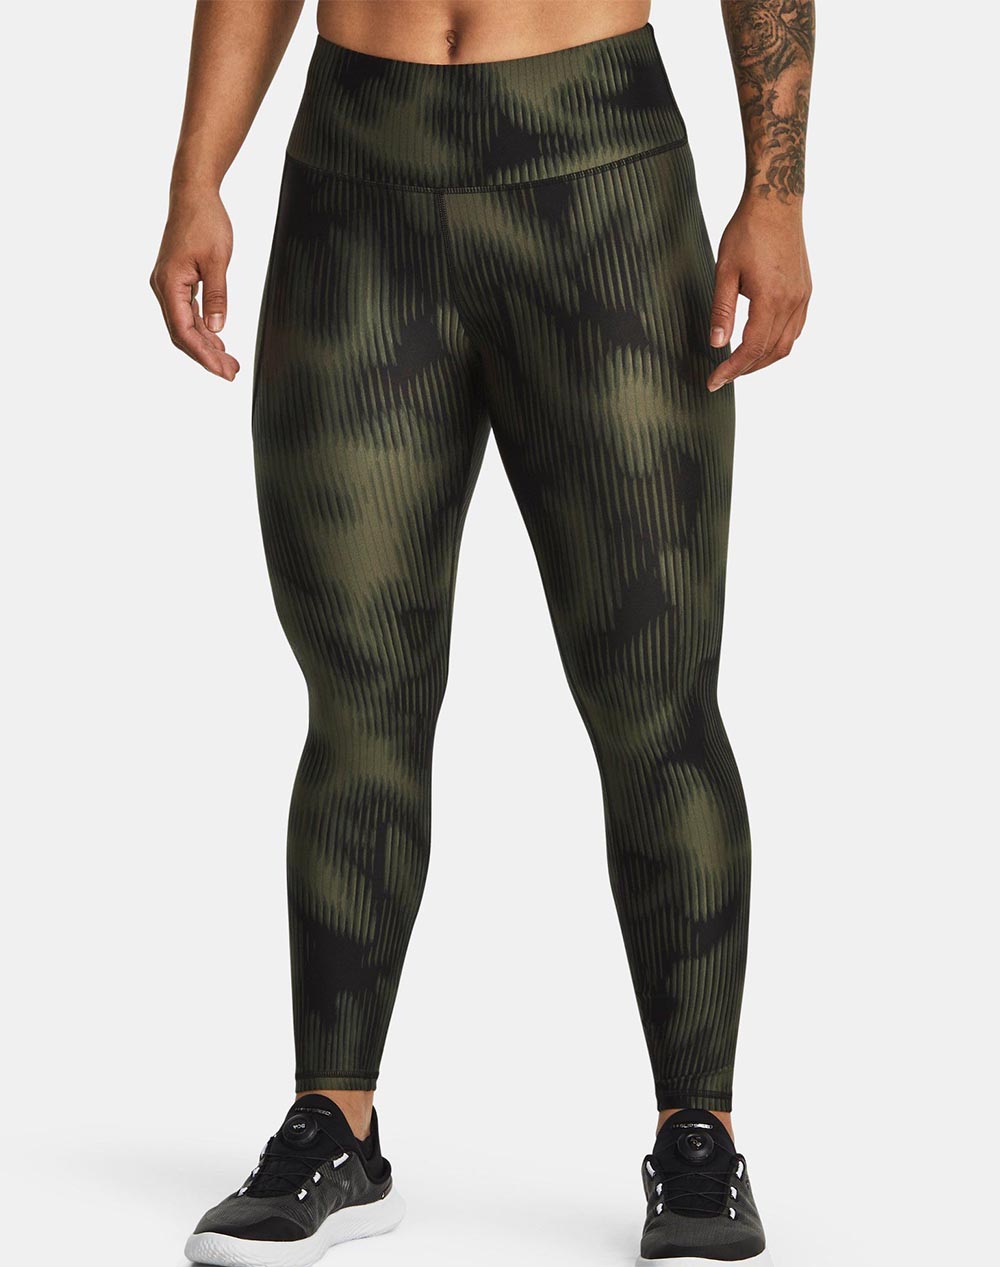 UNDER ARMOUR Women”s HeatGear® Armour Printed Ankle Leggings 1365338-390 Olive 3810AUNDE2600007_XR27006